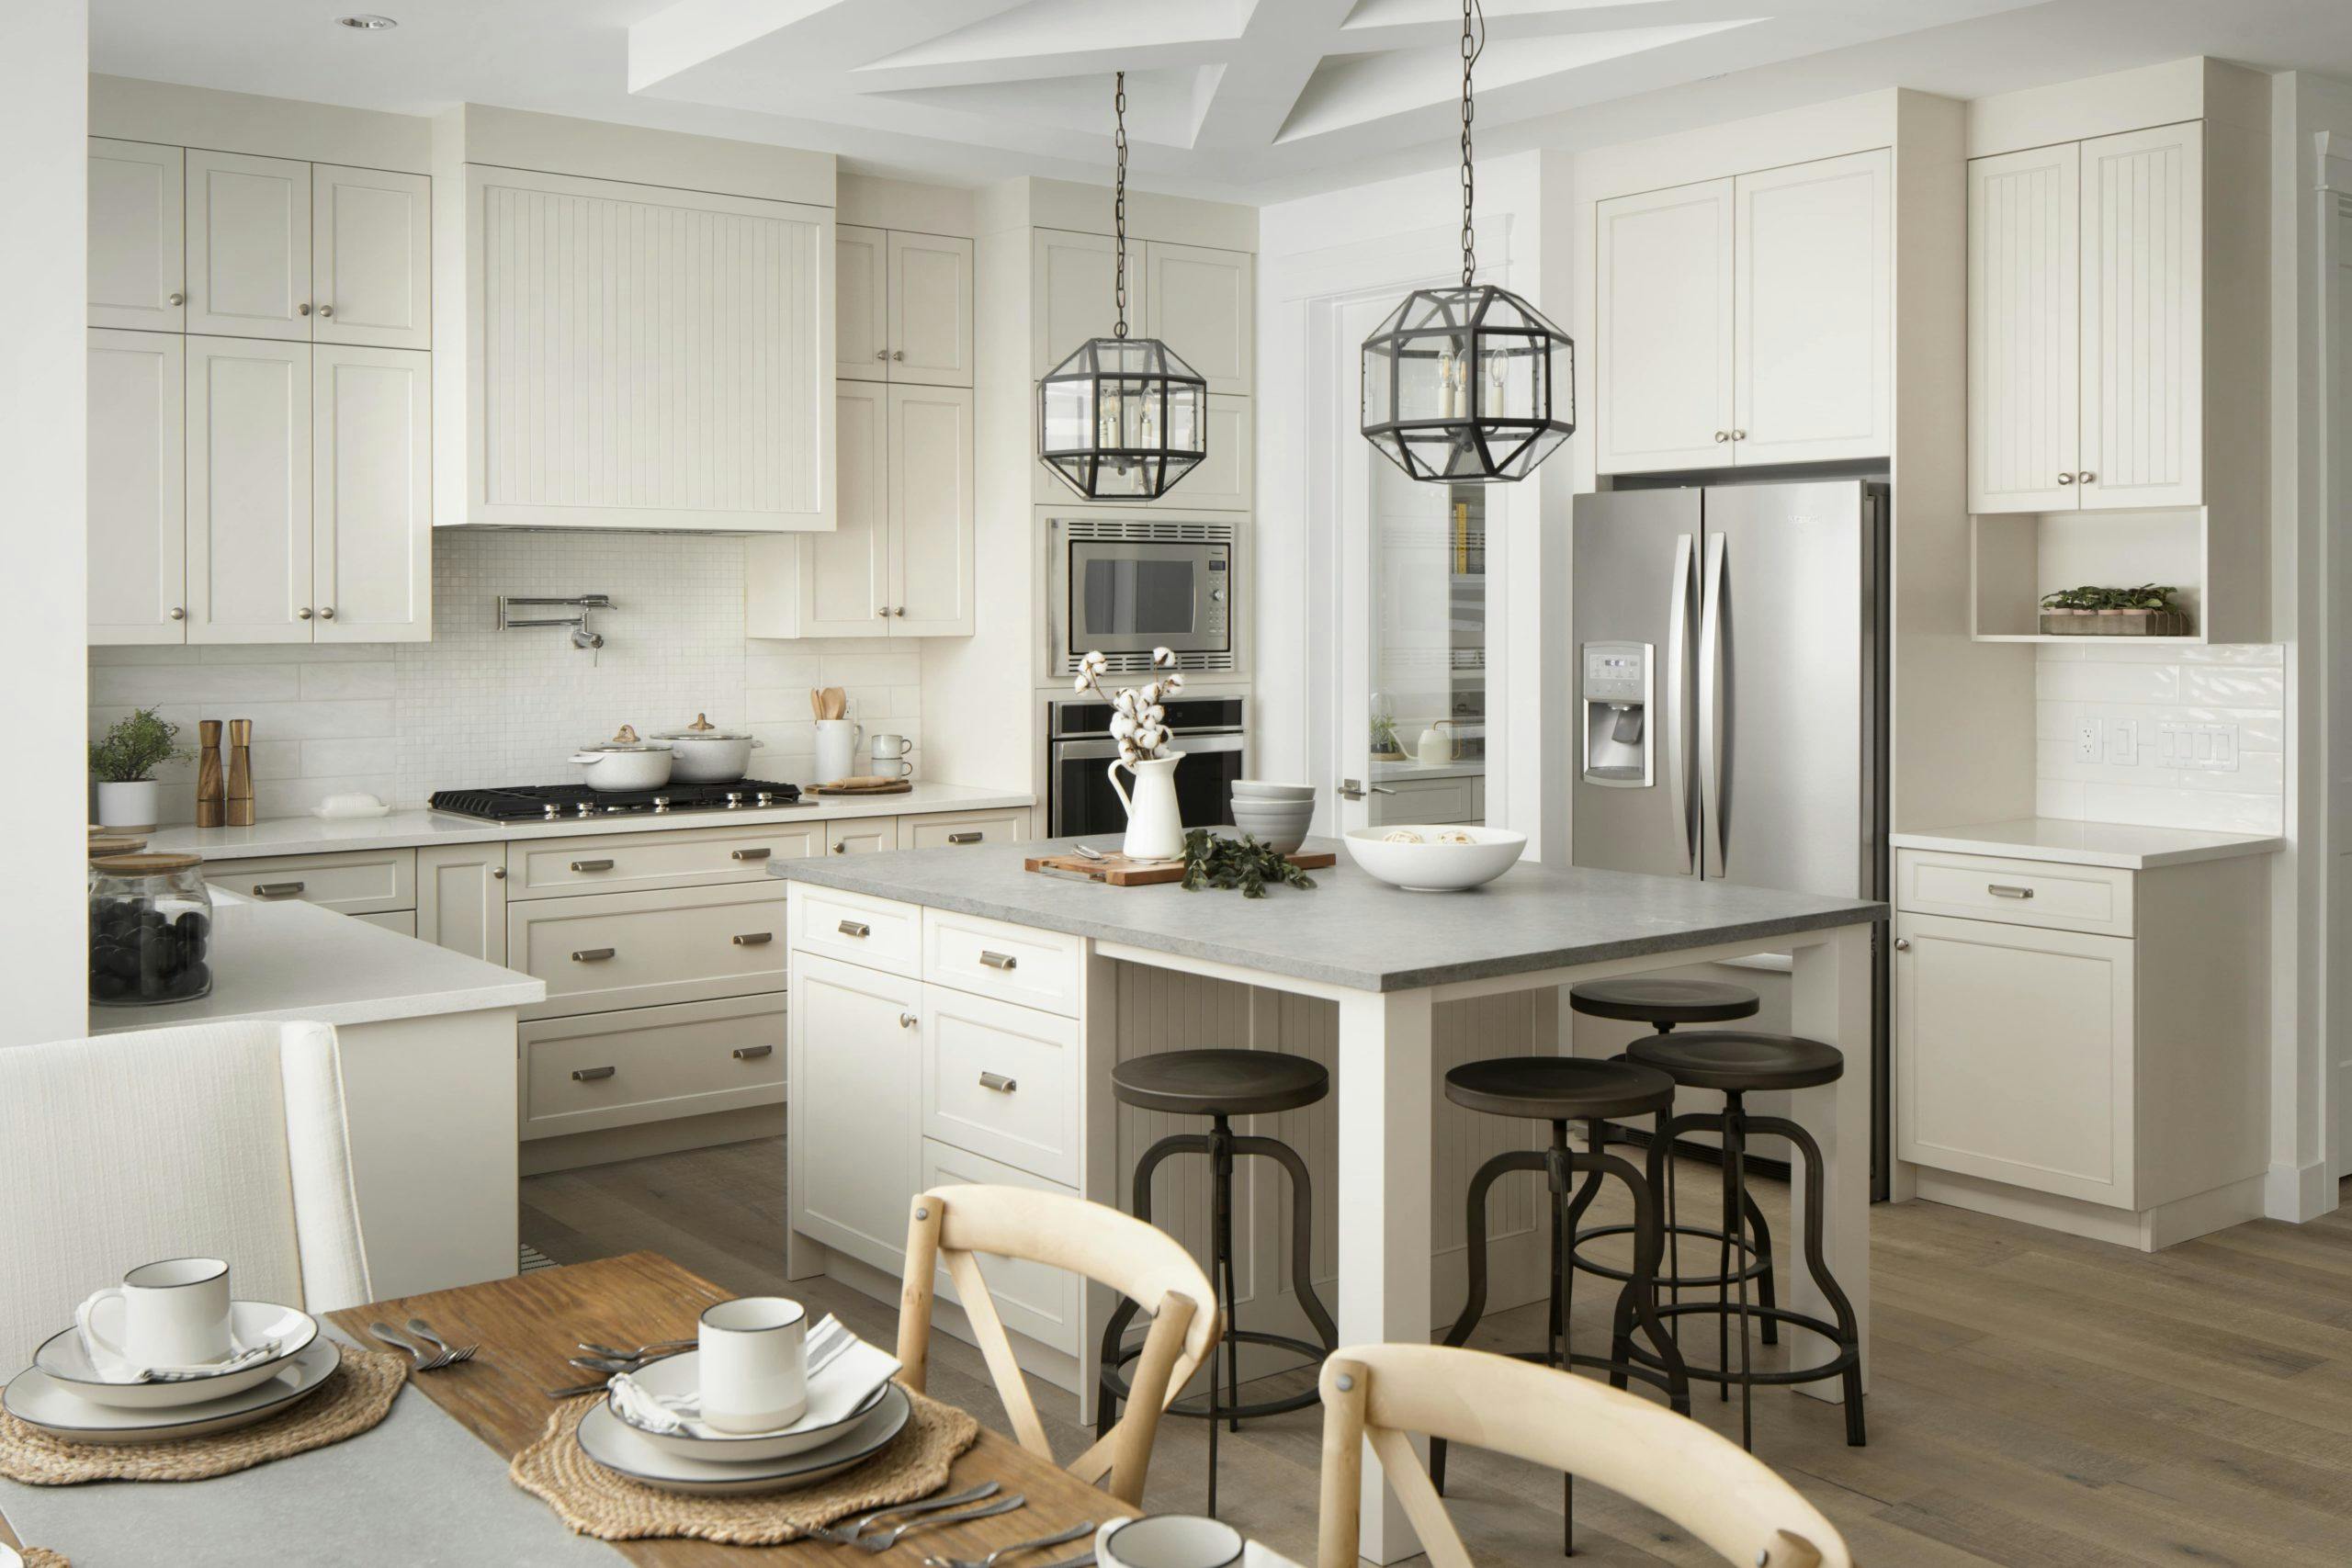 A white showhome kitchen, with flowers in a vase set on the kitchen countertop.